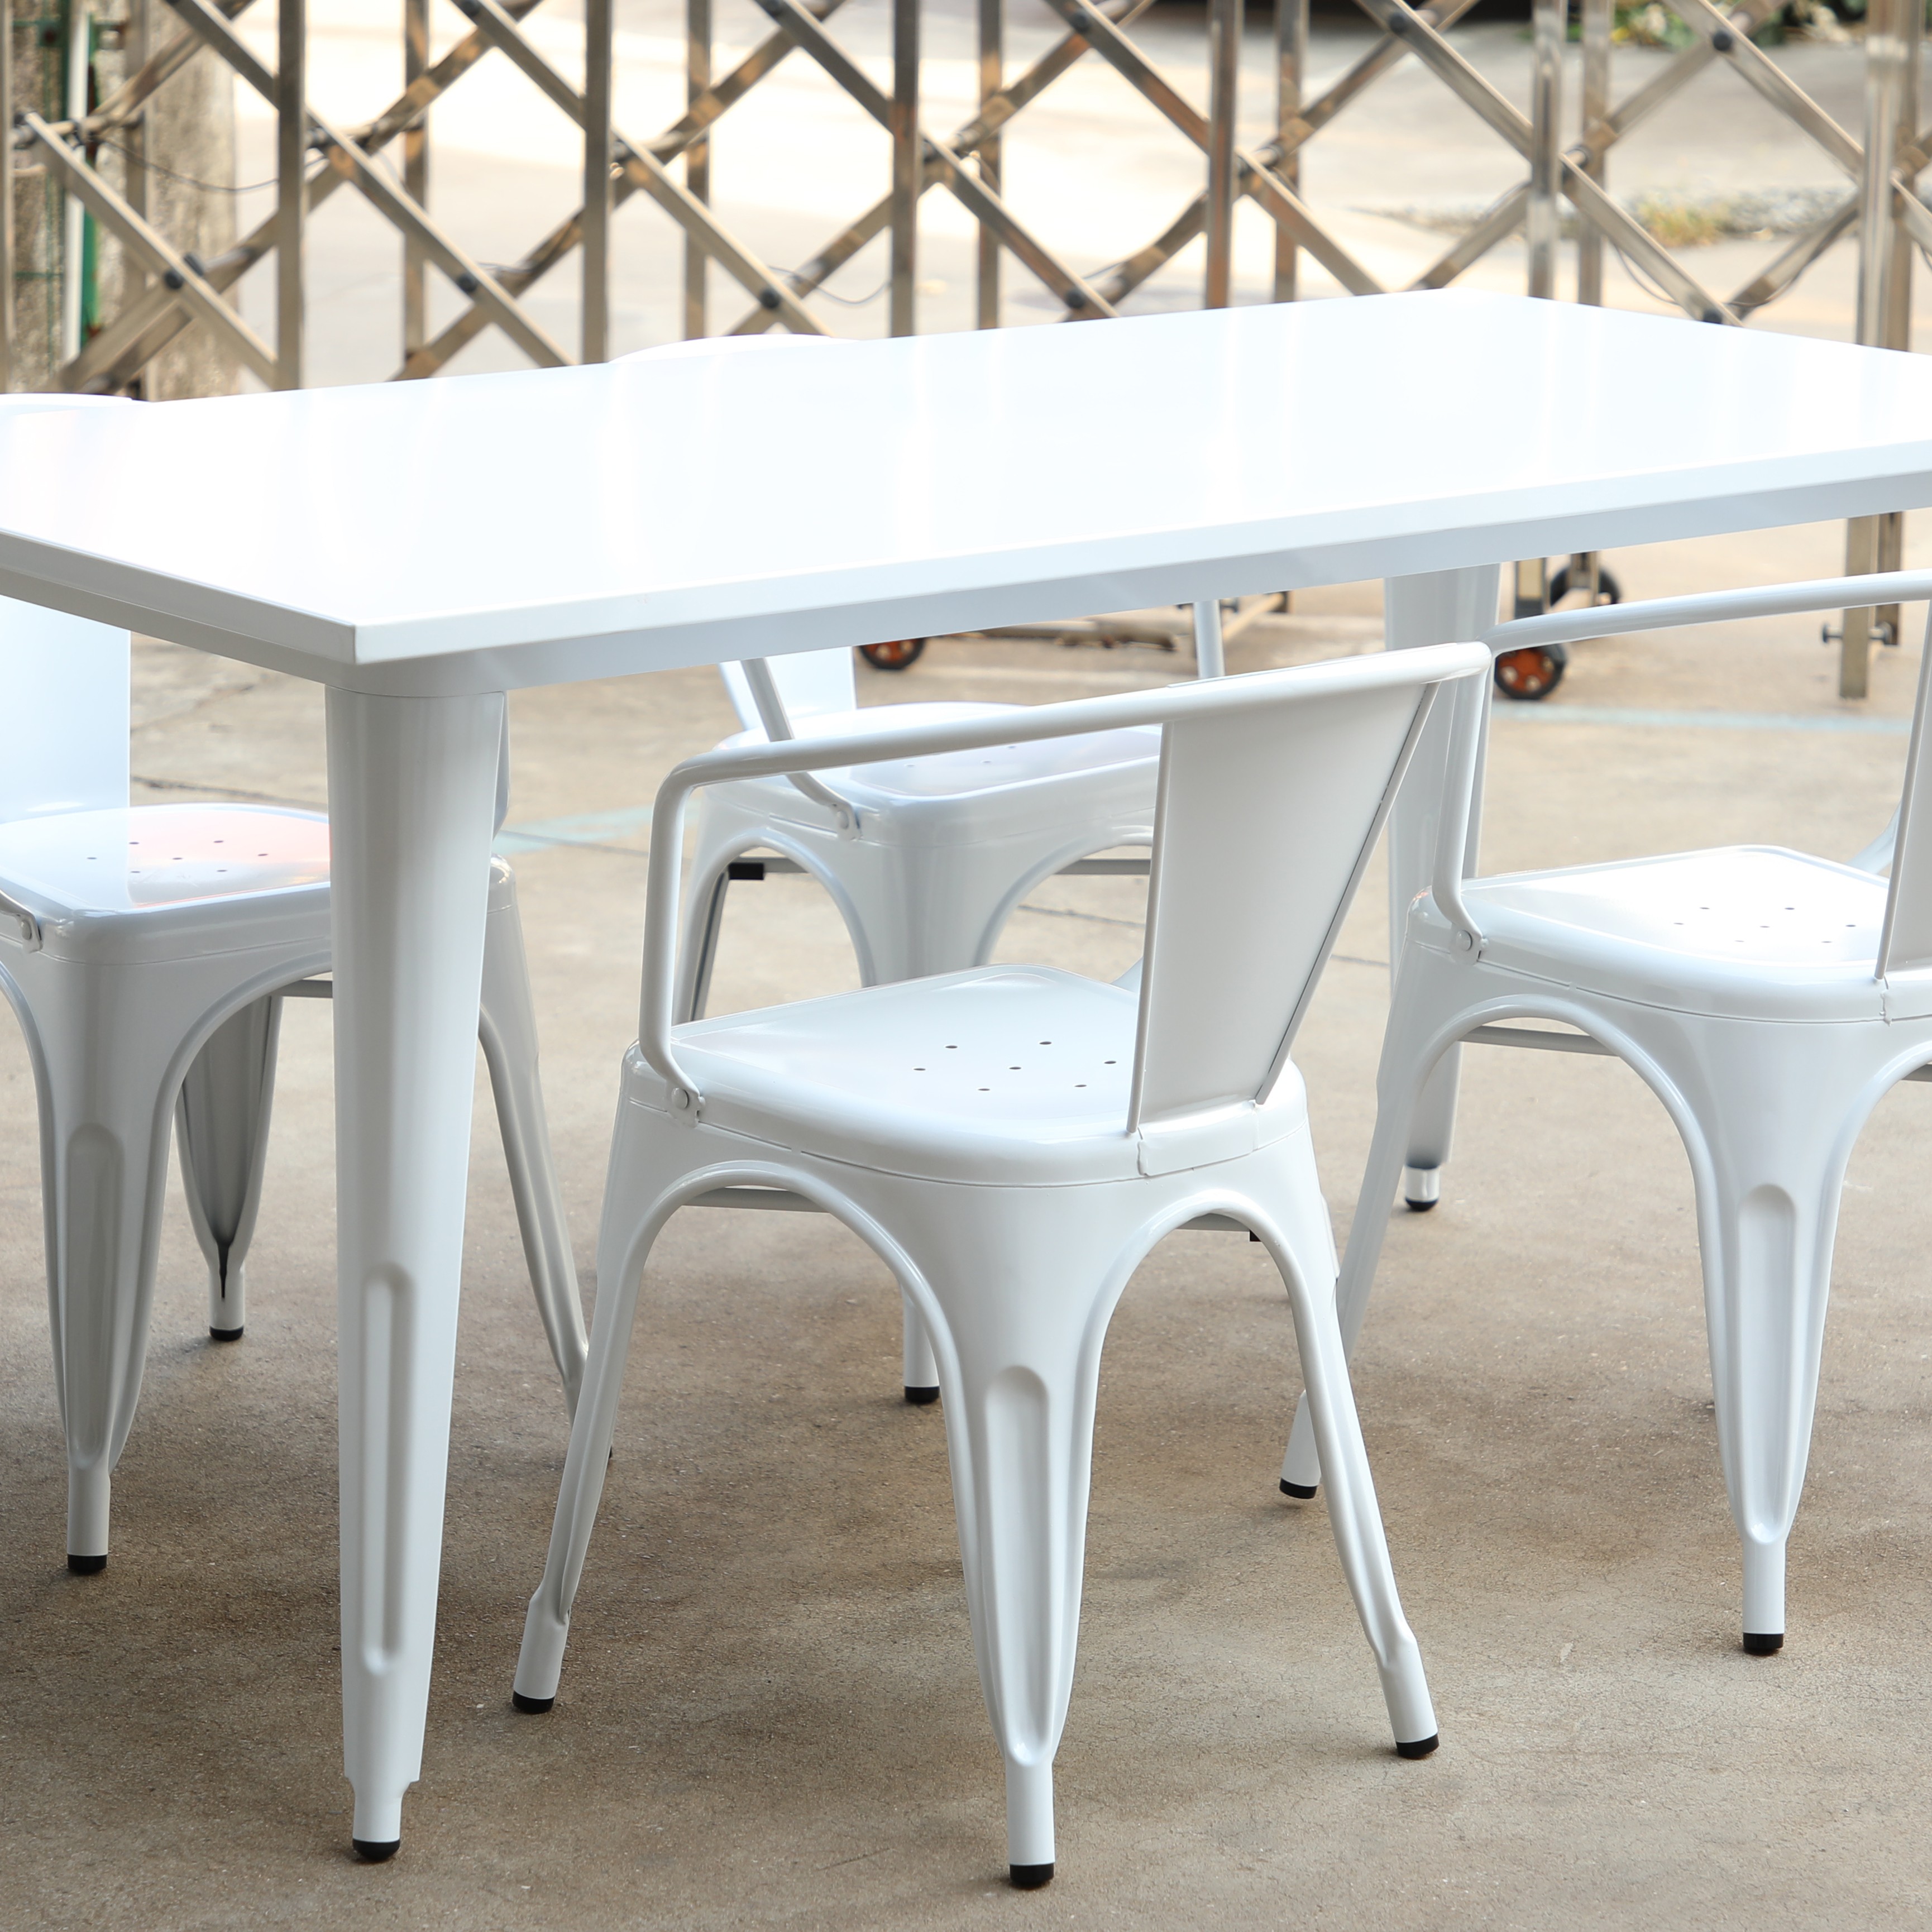 https://www.goldapplefurniture.com/metal-steel-dining-table-for-dodoor-use-ga101t-product/